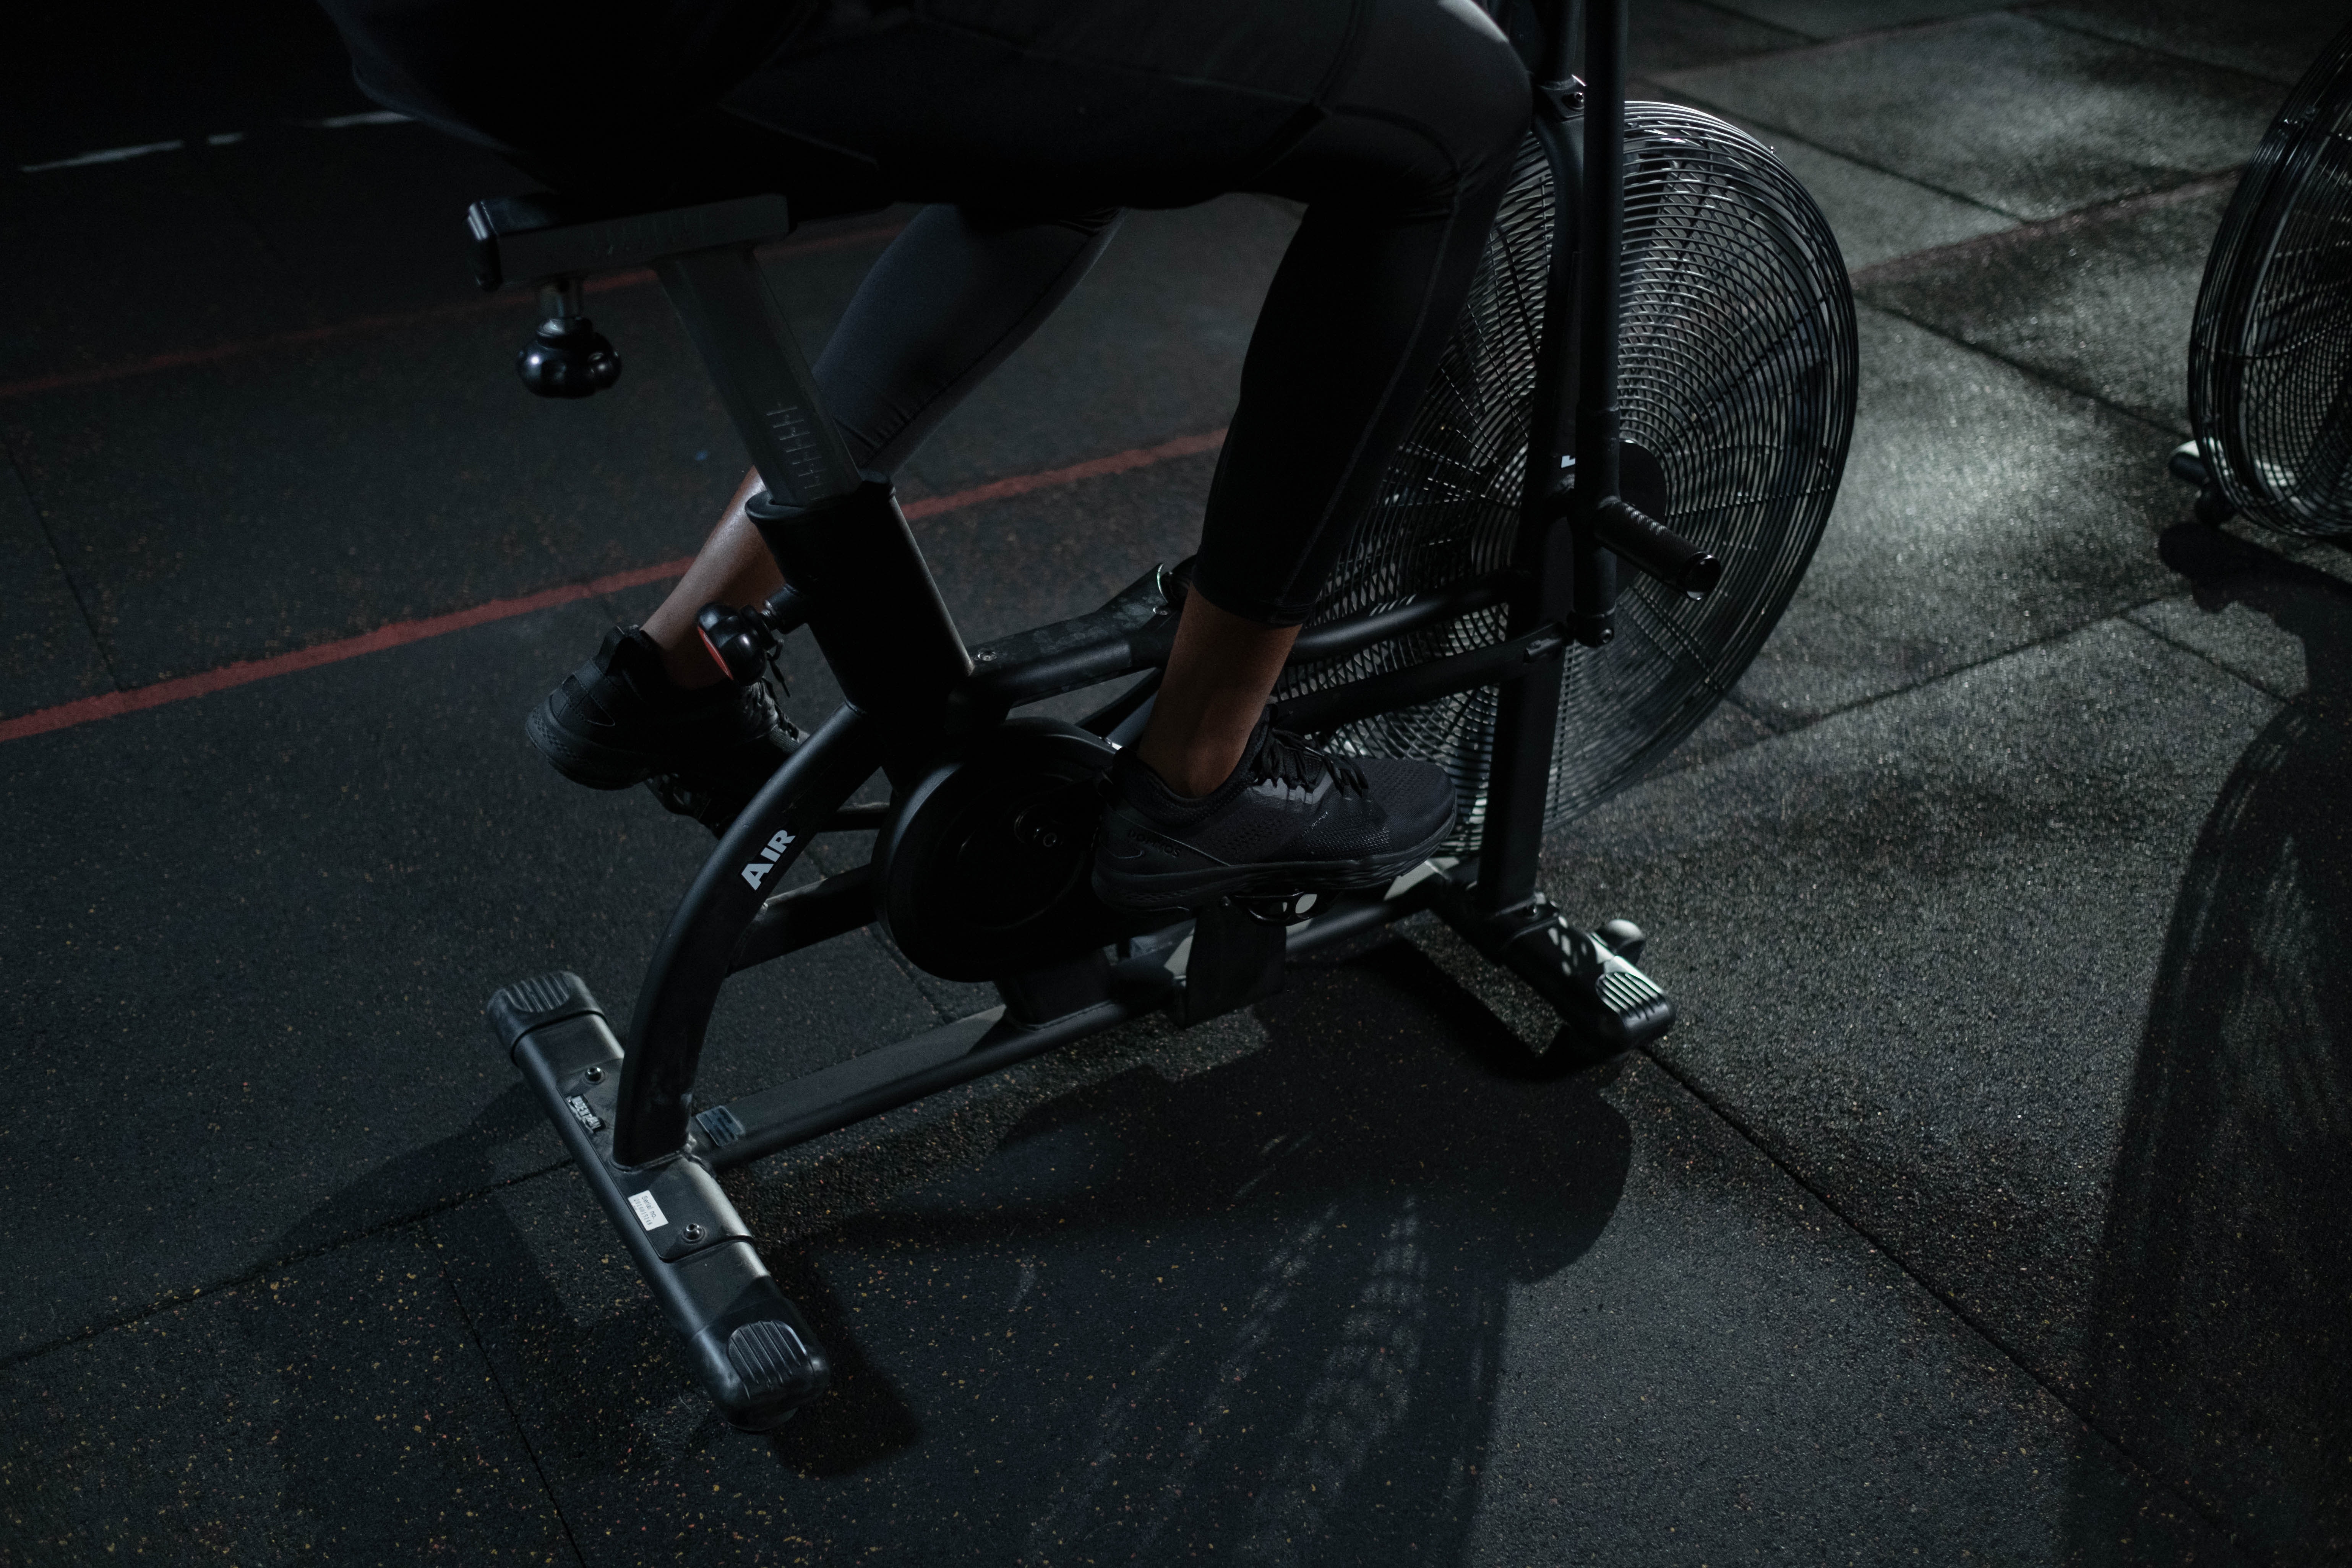 The Best Exercise Bikes for Home Fitness – Reviews and Buying Guide